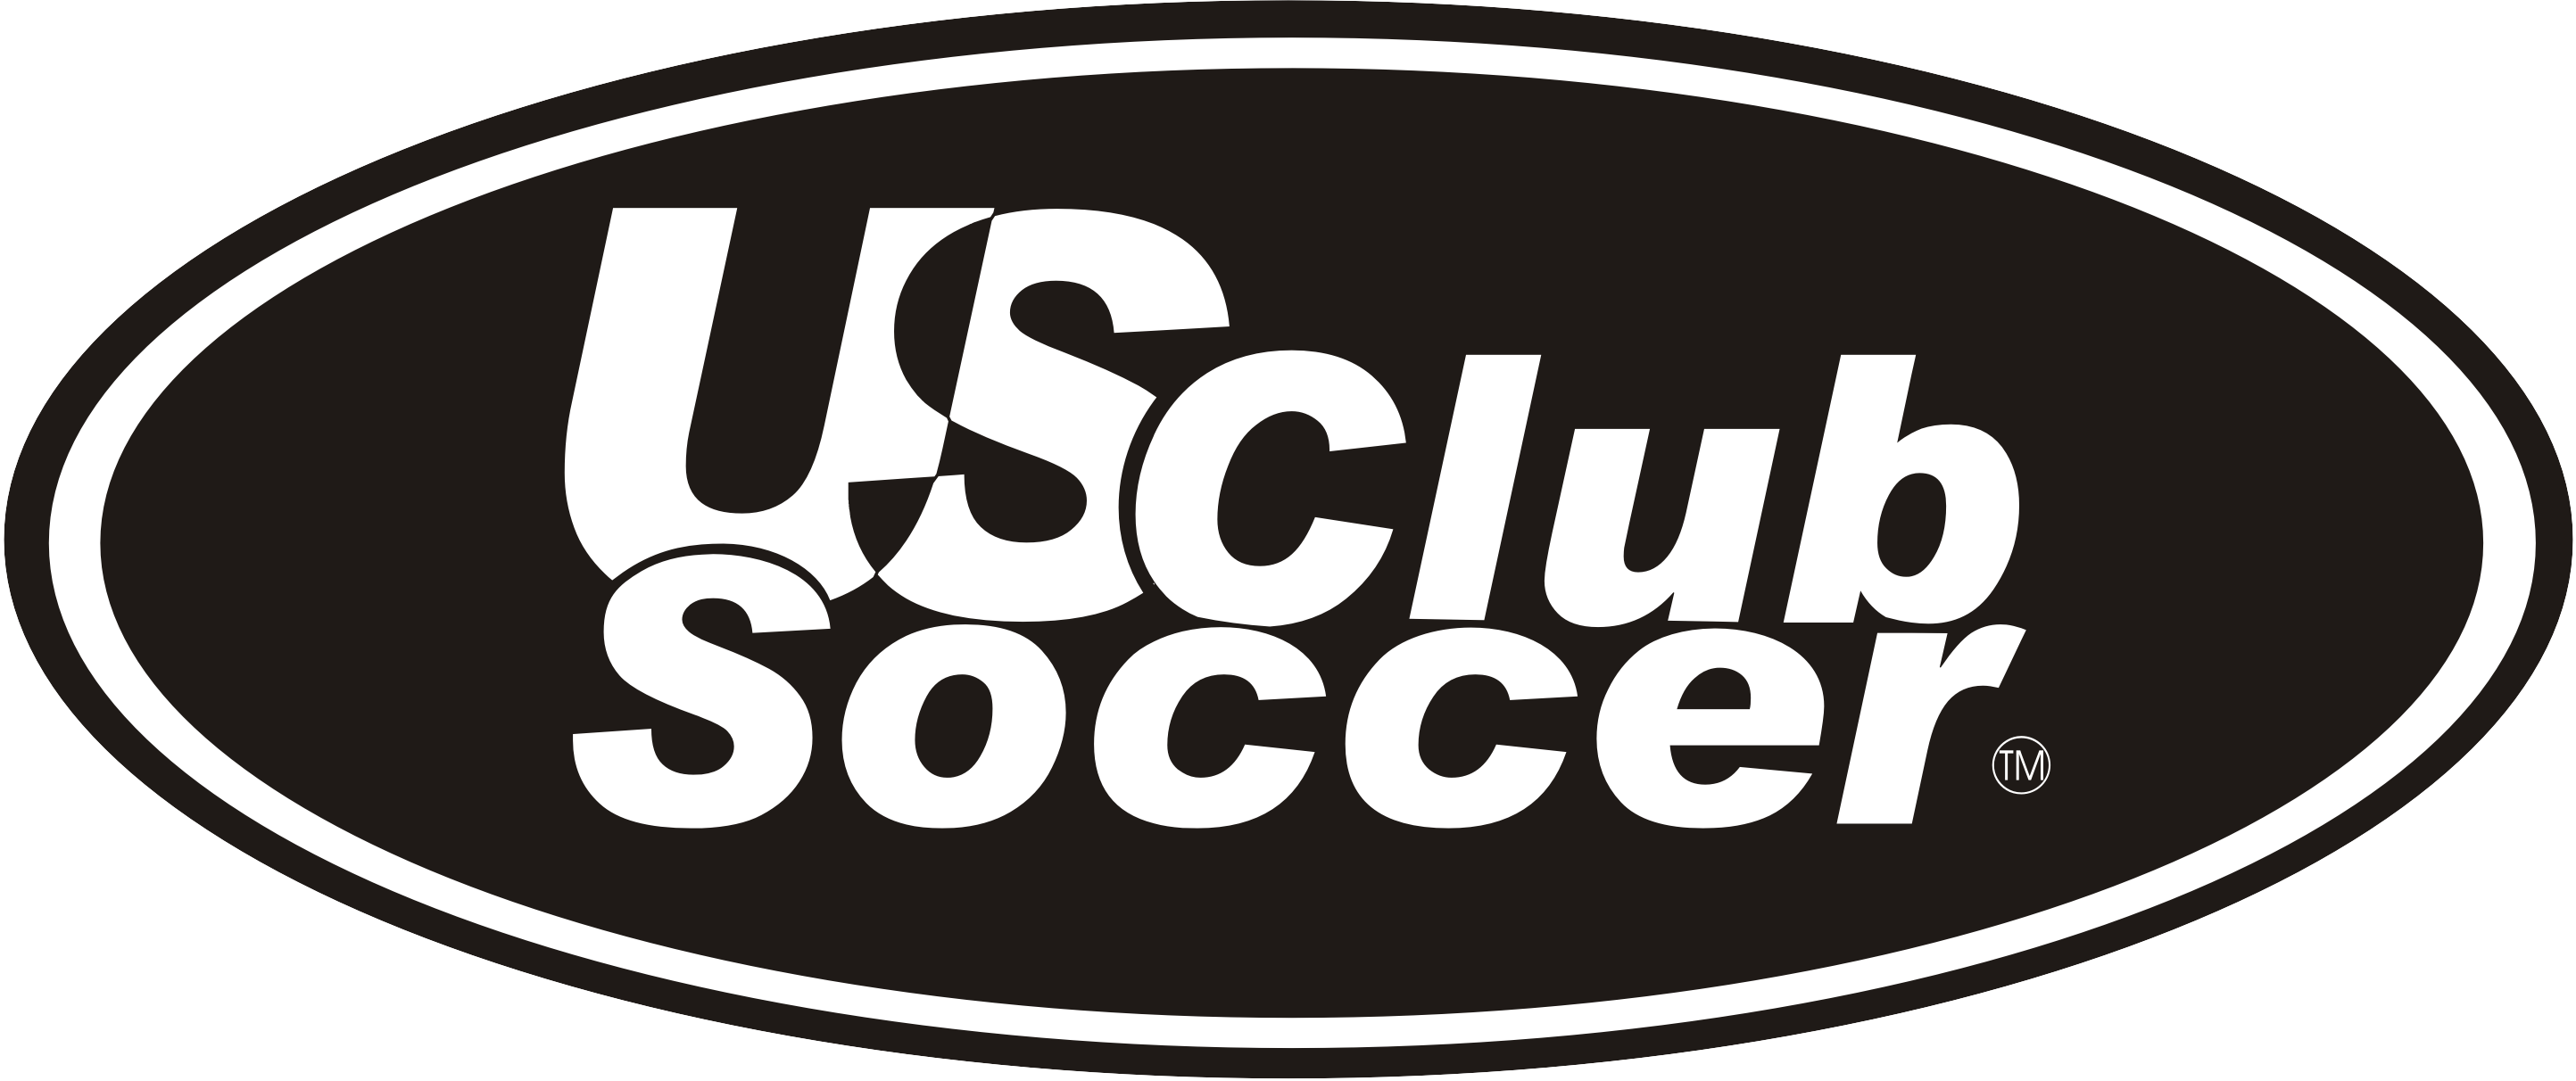 https://ansalions.org/wp-content/uploads/sites/2295/2020/05/LOGO_-_US_Club_Soccer_-_Oval.png